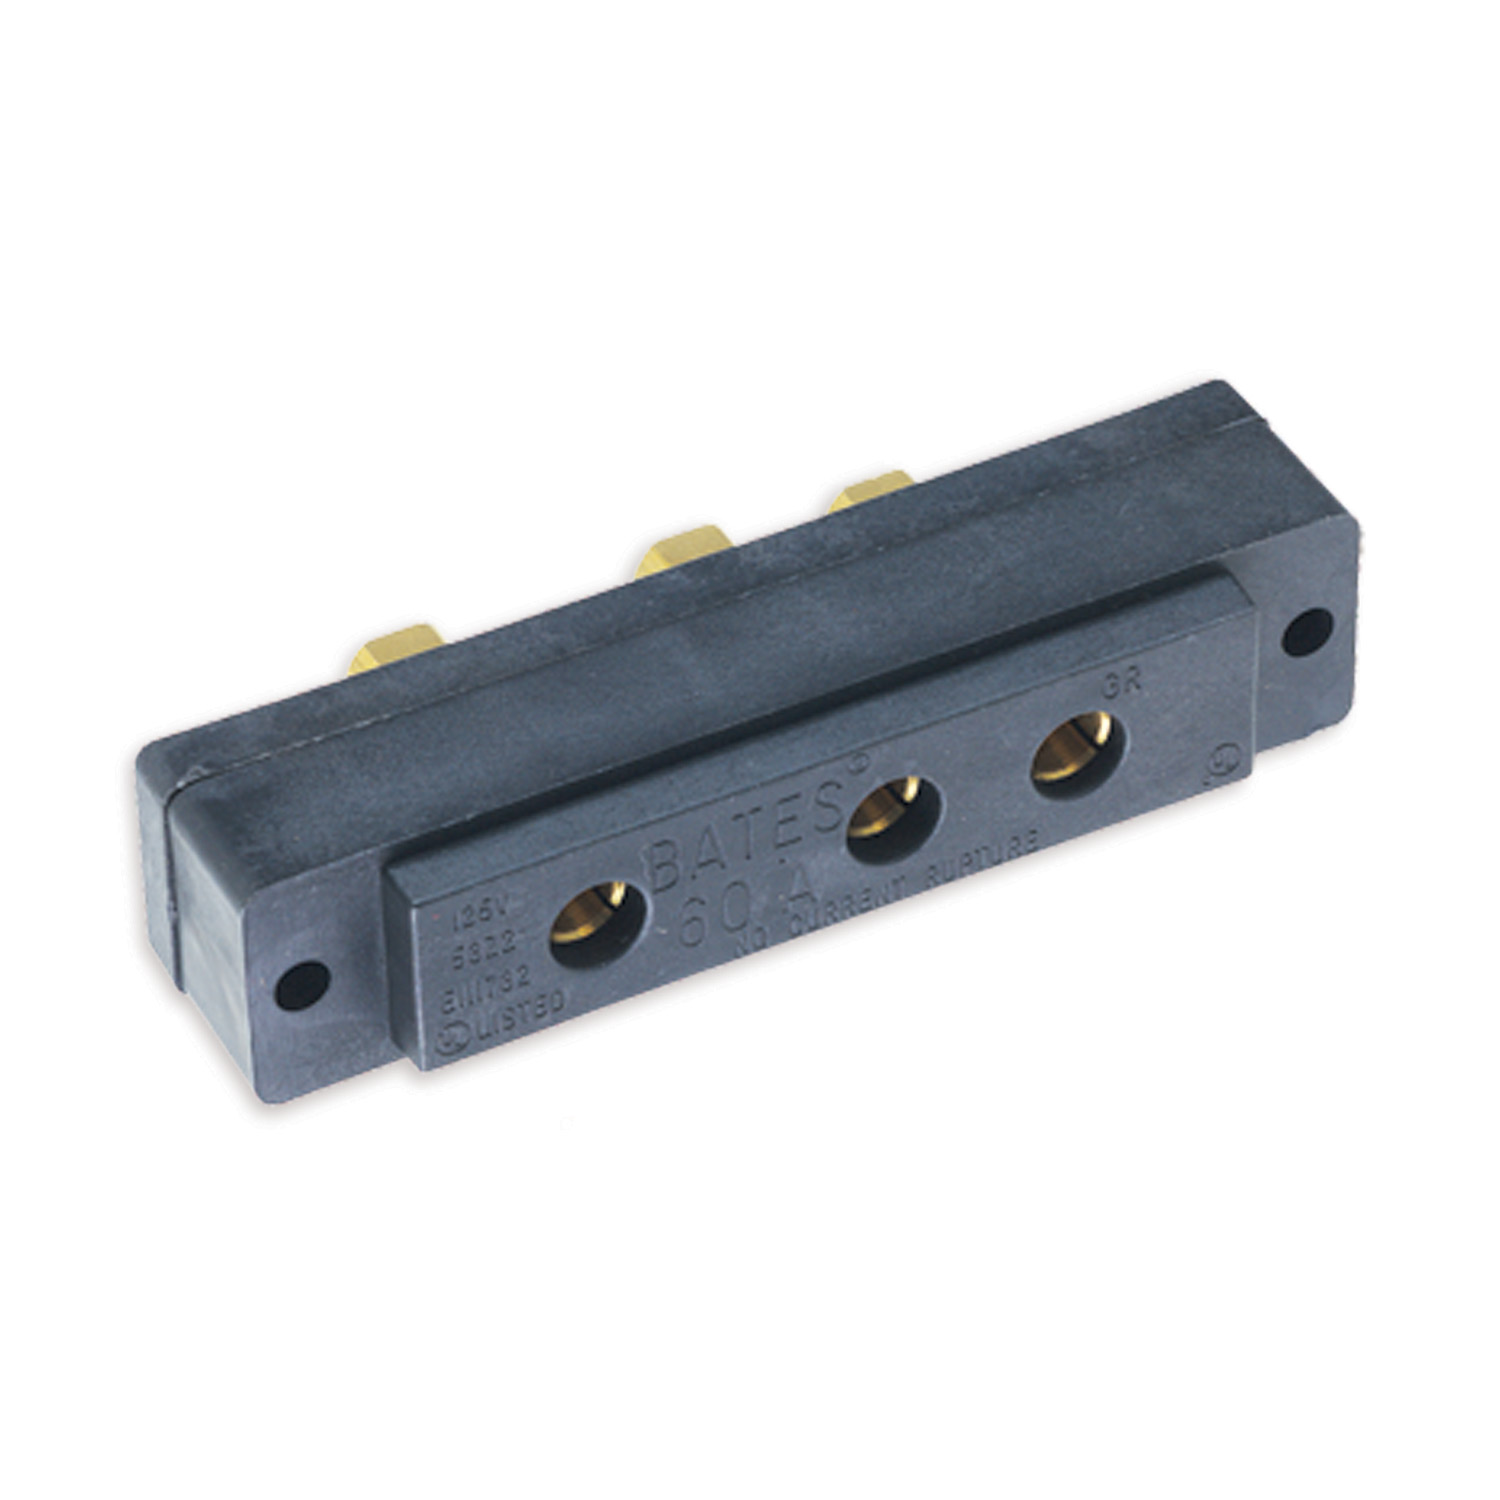 Bates Stage Pin (60A / 125V) Female Panel Mount